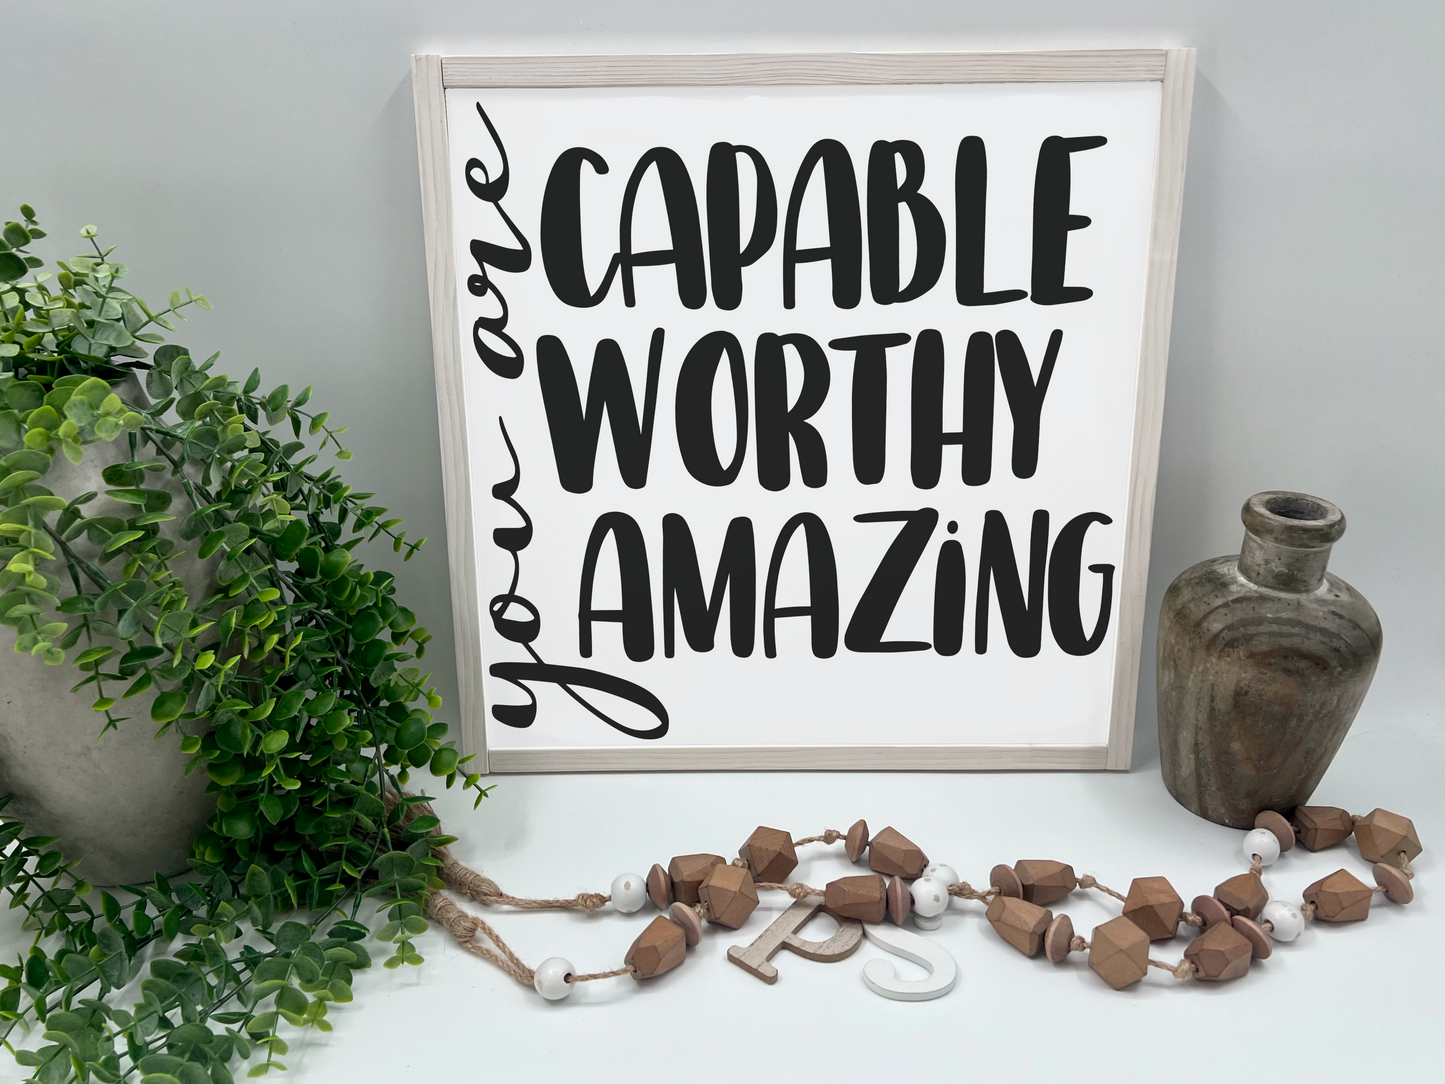 You Are Capable, Worthy, Amazing - White/Thick/White Wash - Wood Sign